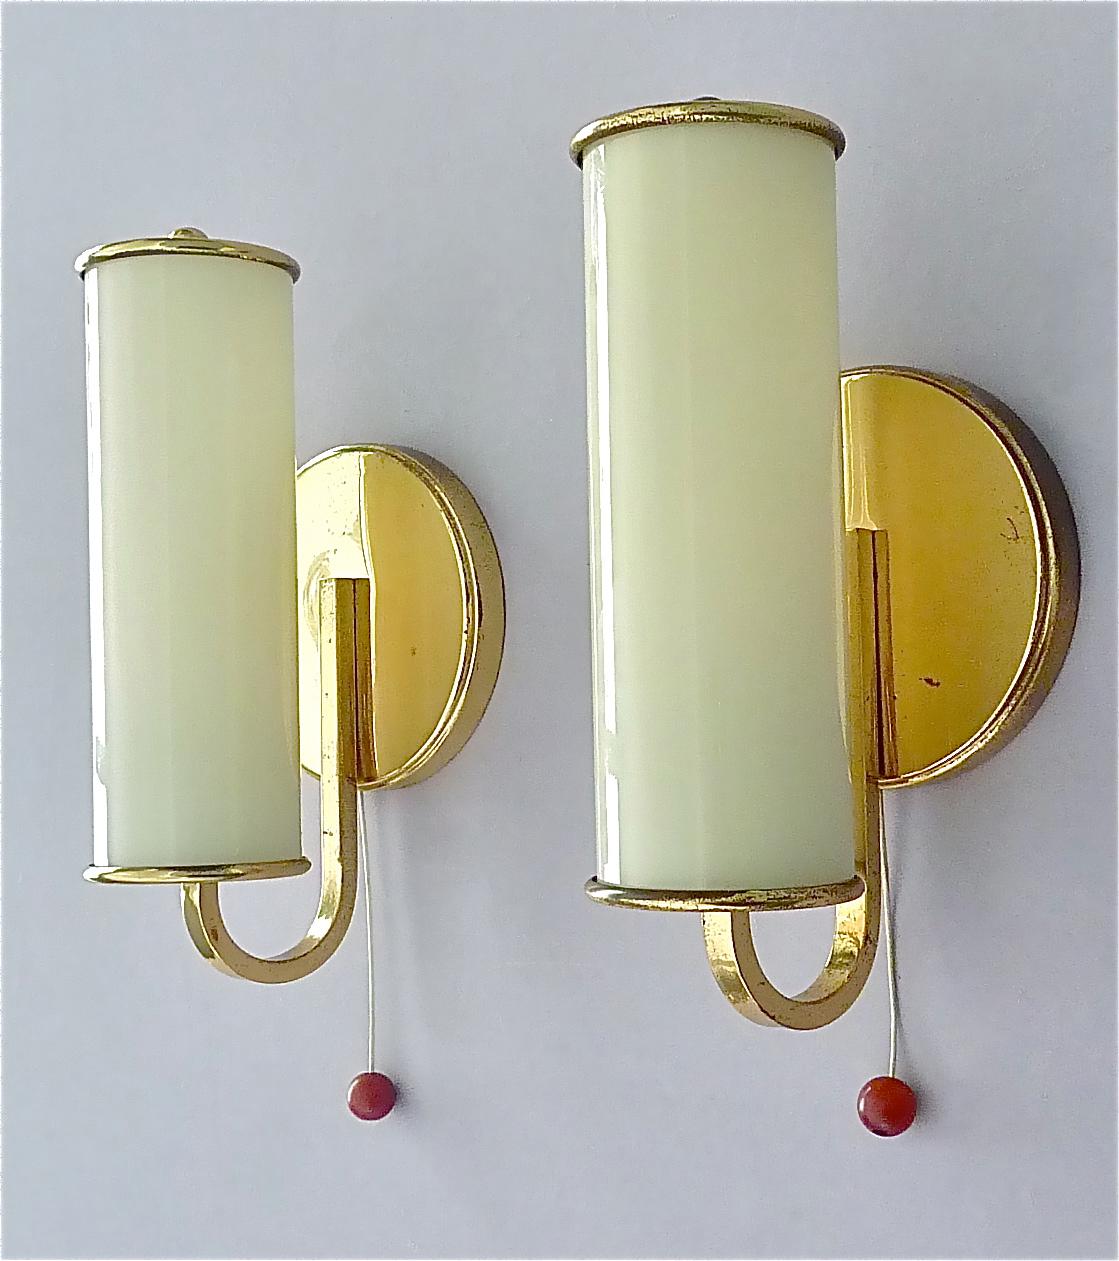 Patinated Pair Modernist Bauhaus Sconces Tynell Style Brass Yellow Tube Glass Shades 1930s